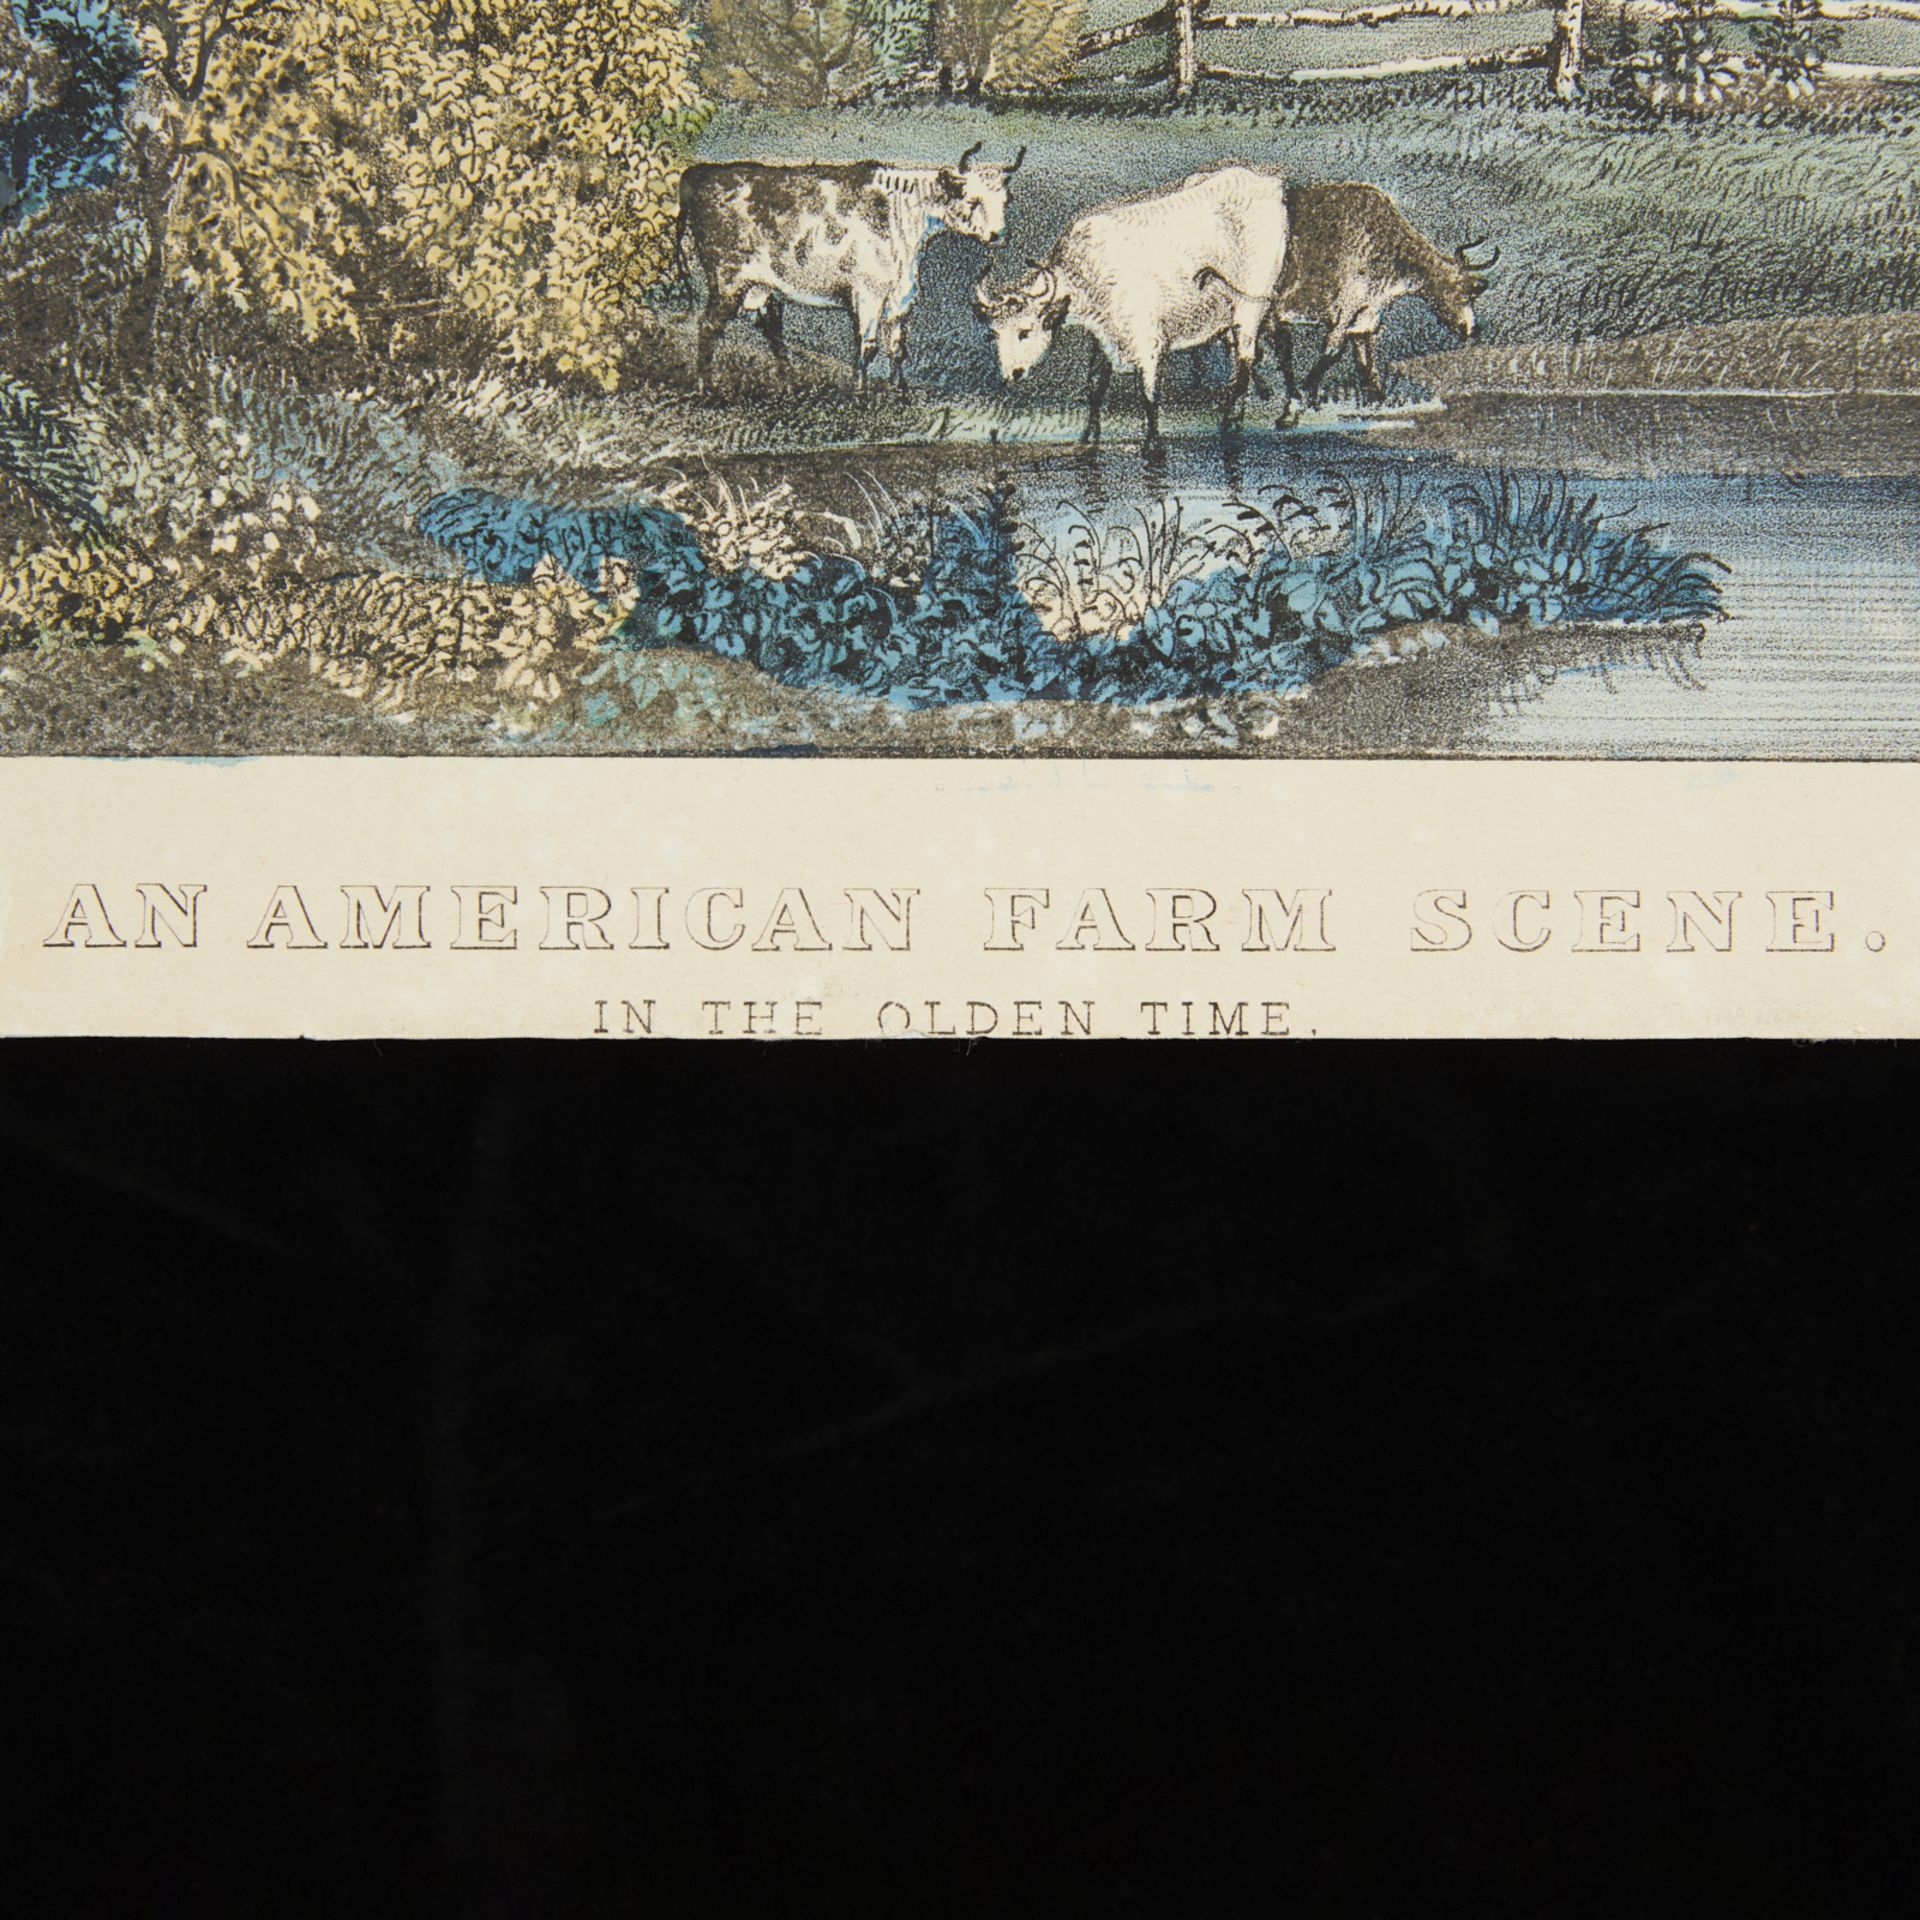 Currier & Ives "American Farm Scene: Olden Time" - Image 2 of 7